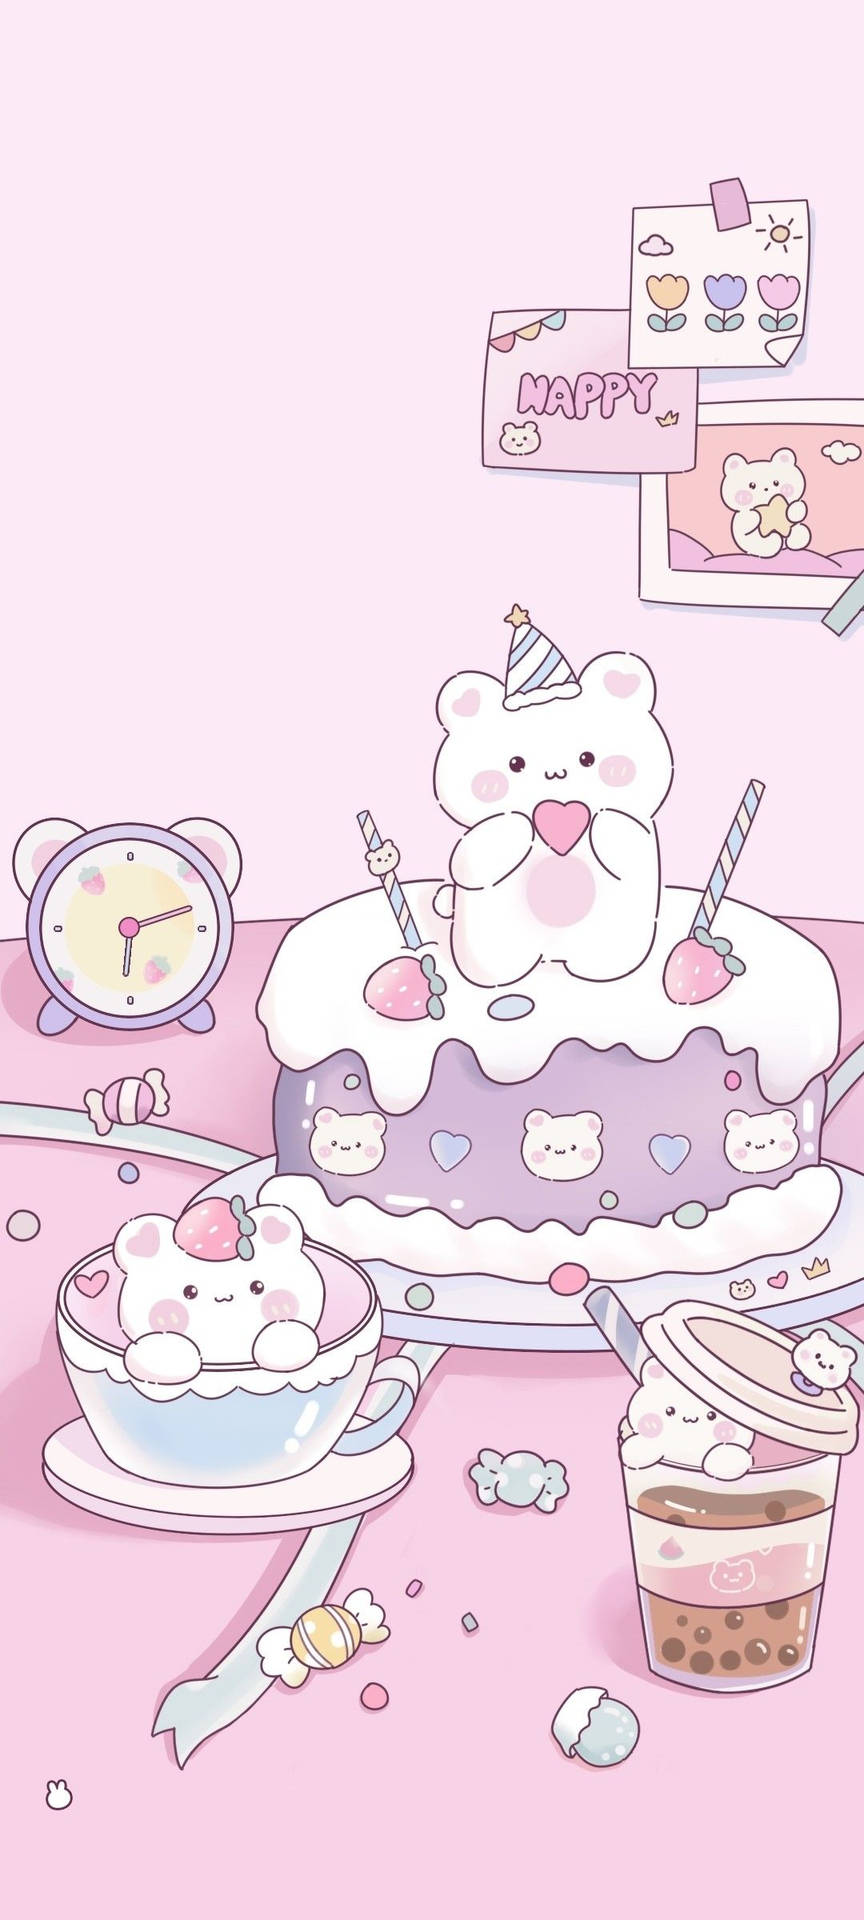 Cake And Tea Soft Aesthetic Background